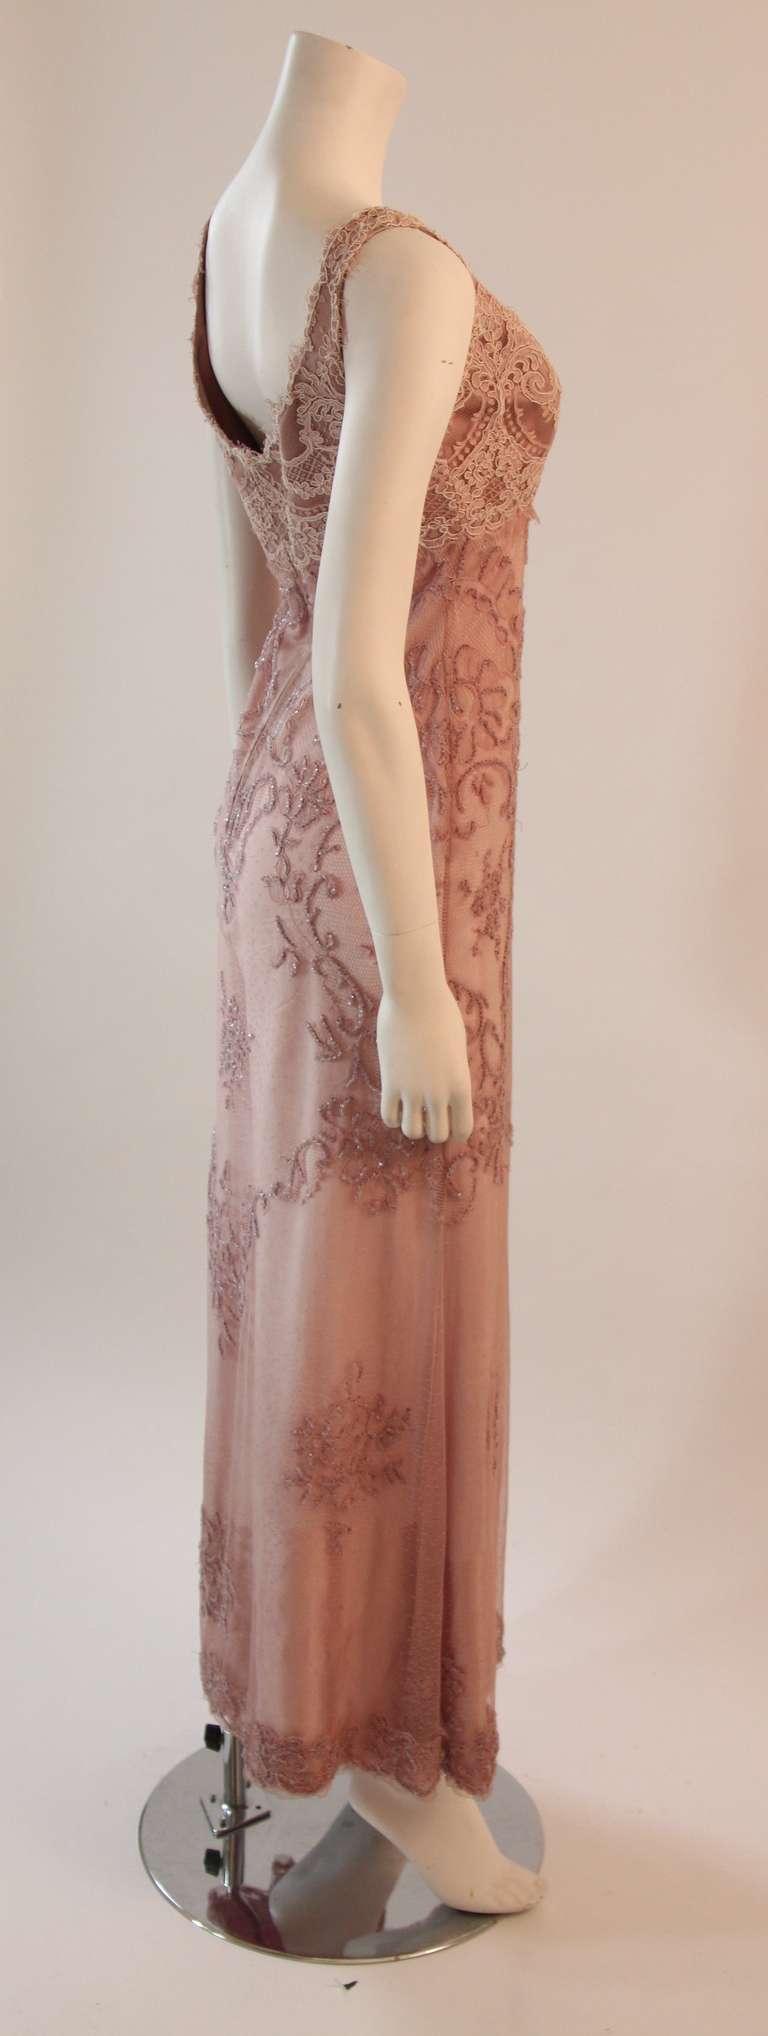 Badgley Mischka Beaded Lace Overlay Blush Pink Gown Size 4 1